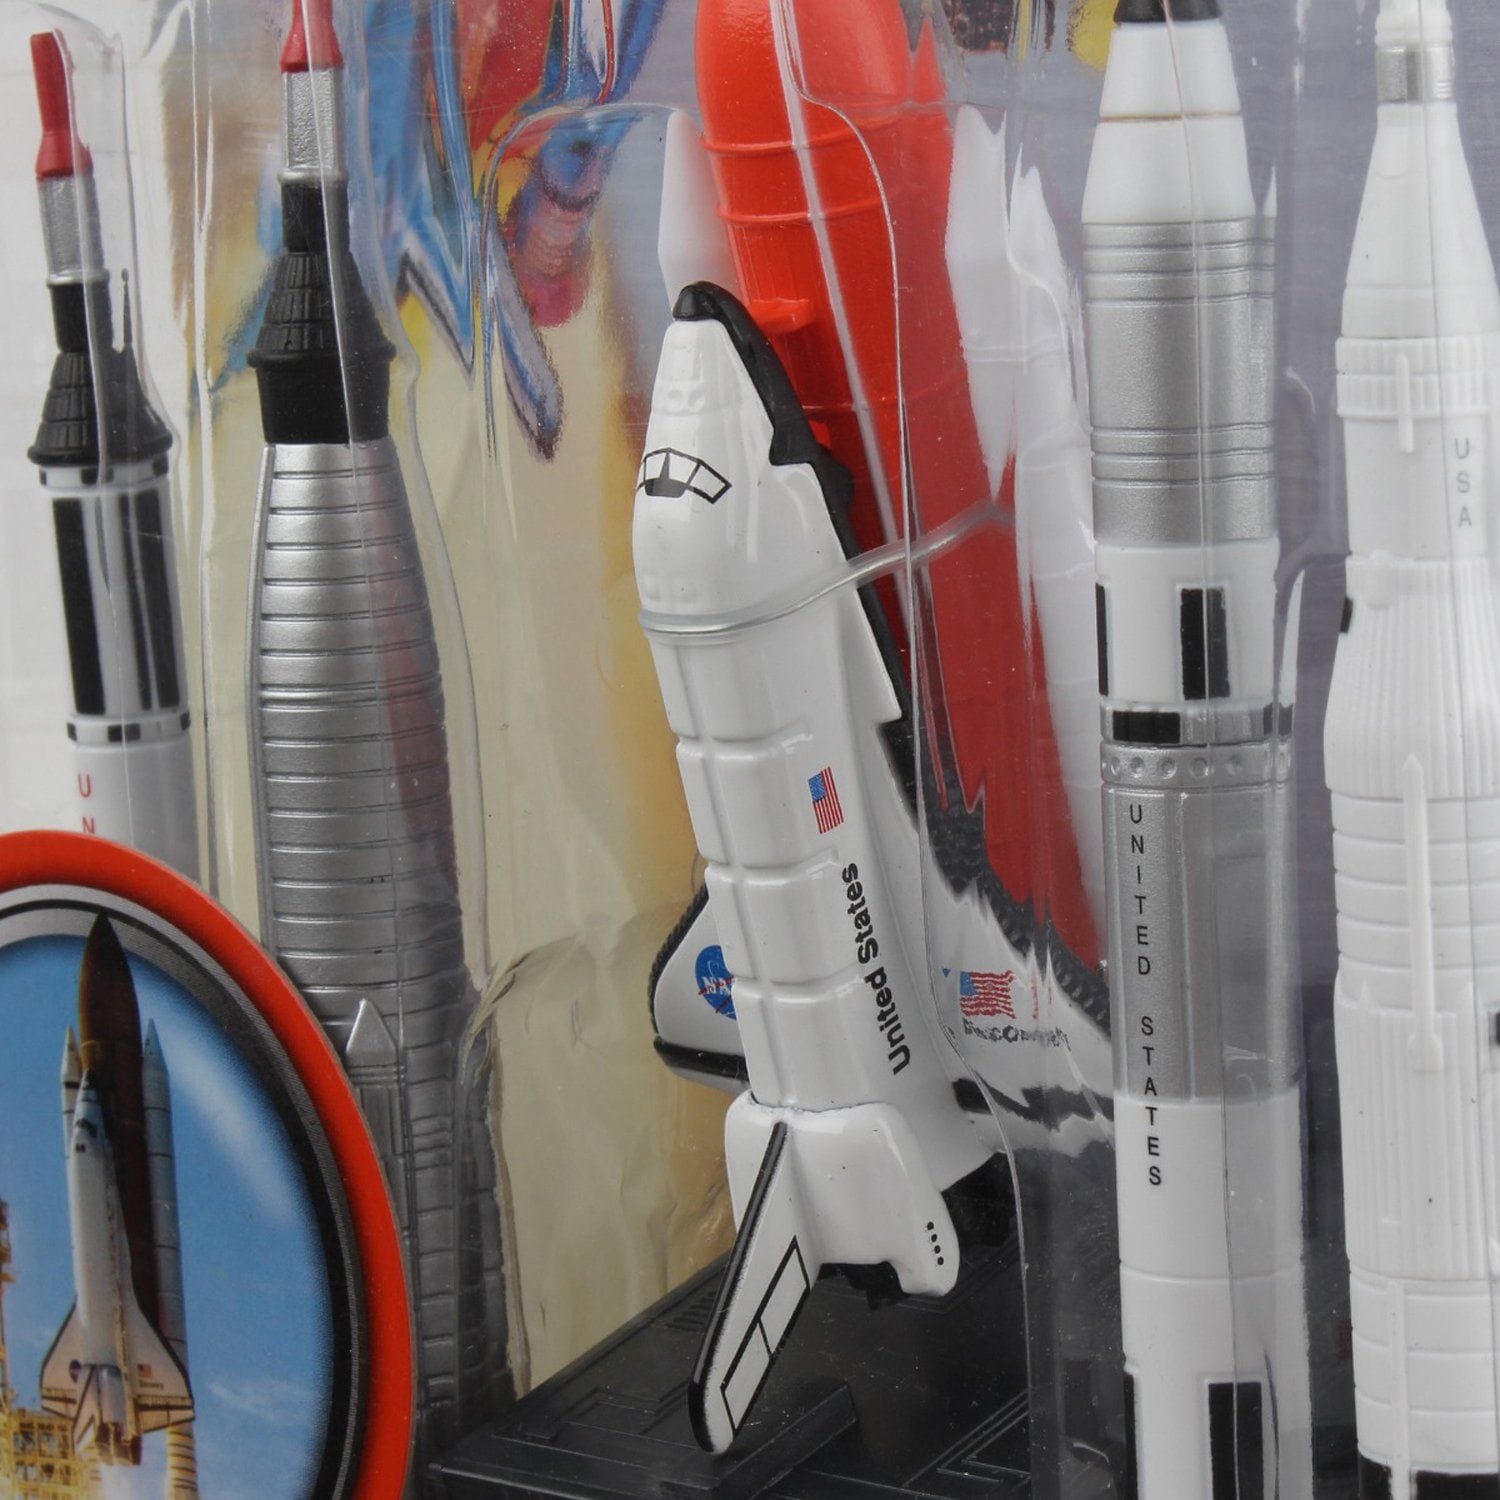 Space Shuttle And Rockets Gift Pack - PilotMall.com